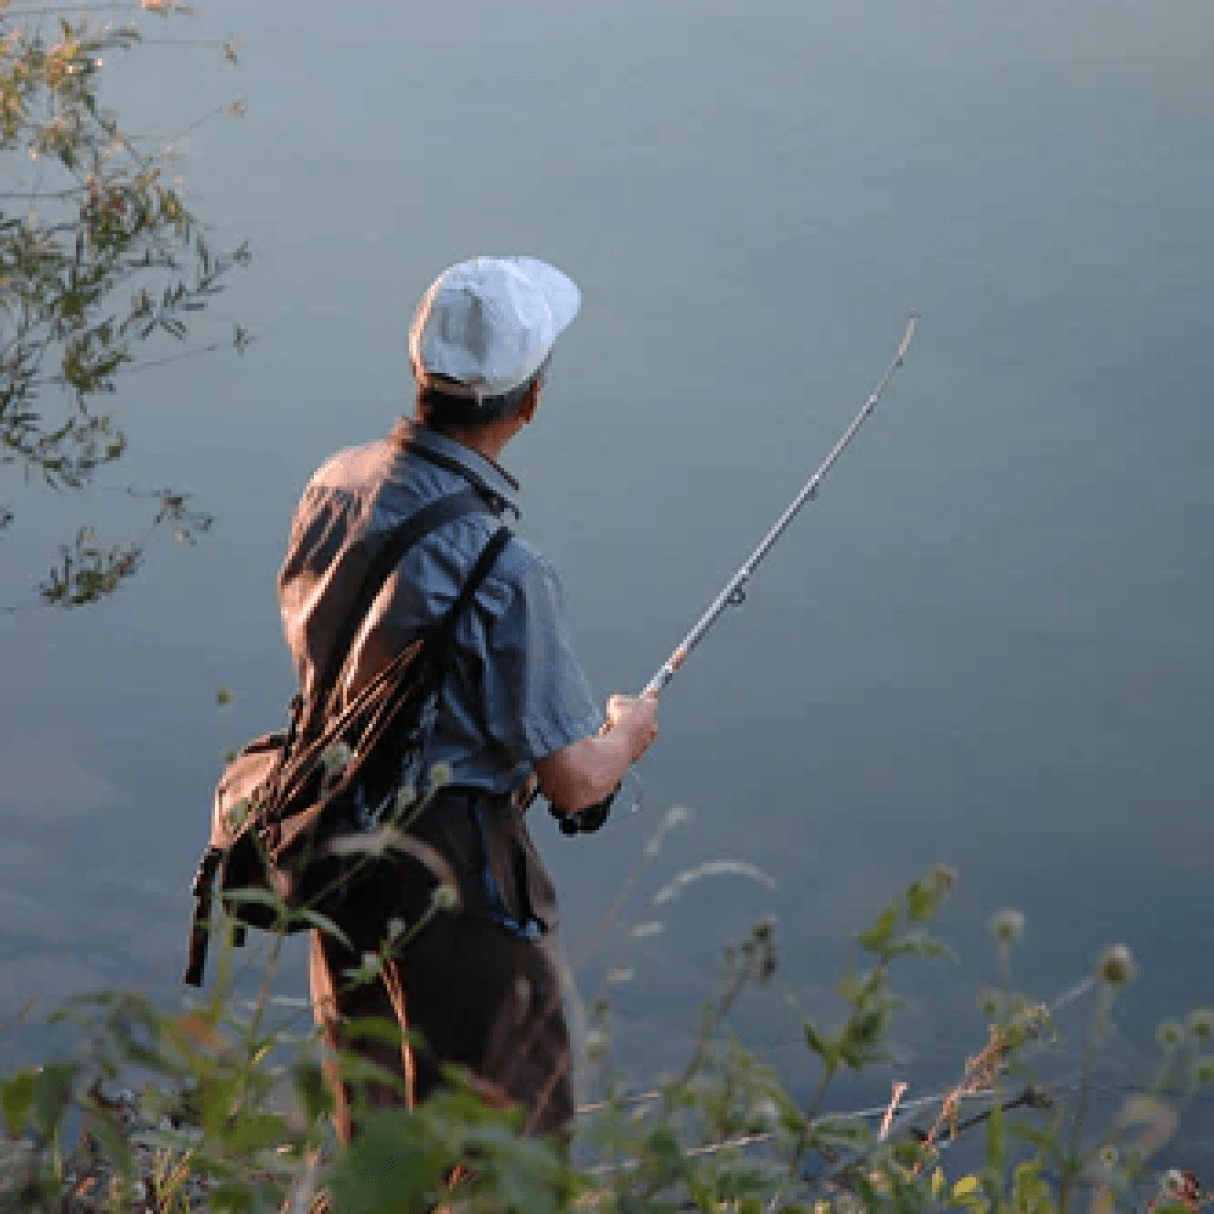 Man fishing in a body of water